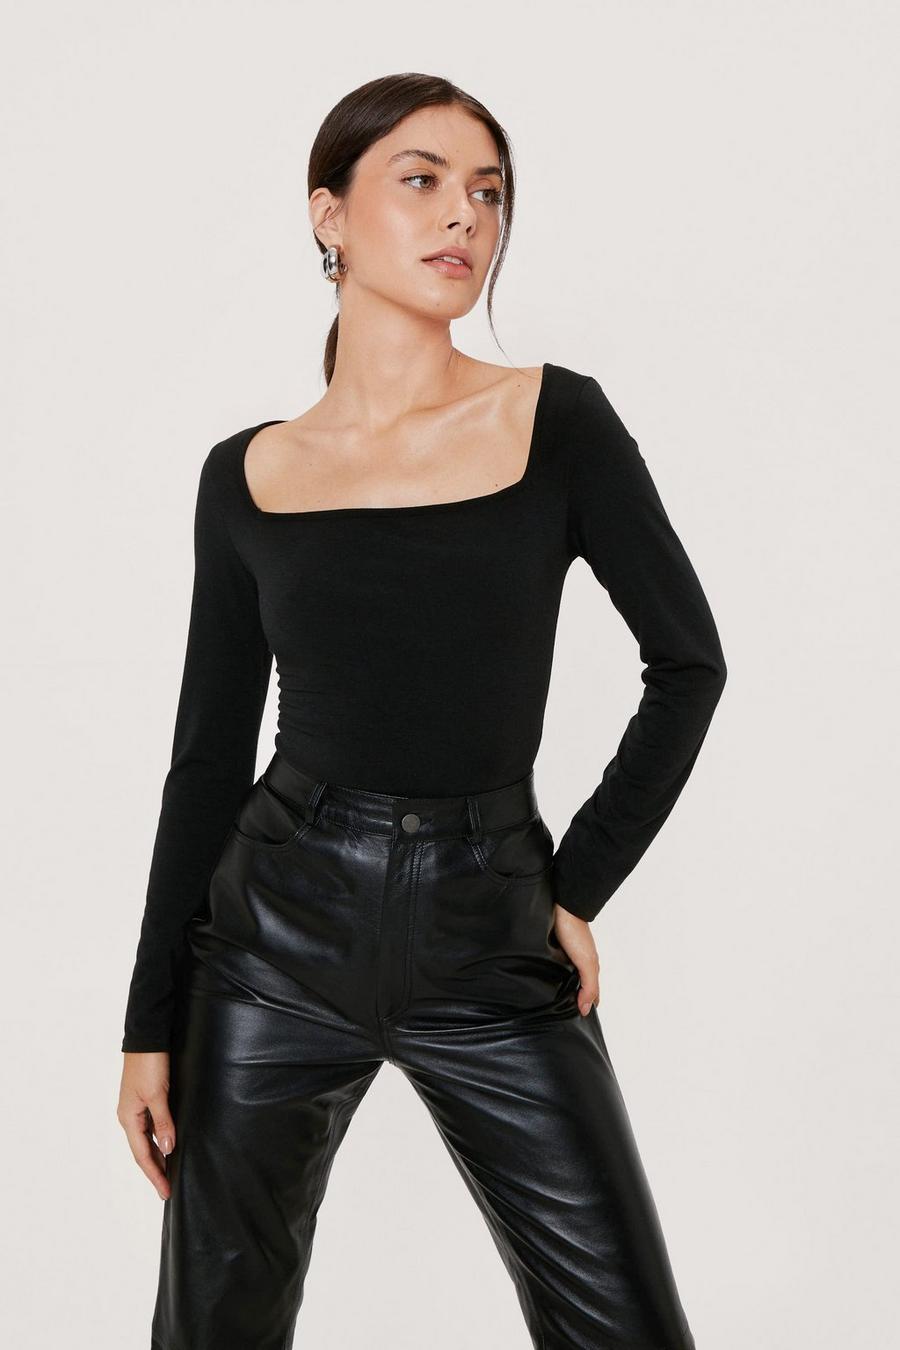 Square Neck Tops | Square Neck Bodysuits & Crop Tops | Nasty Gal